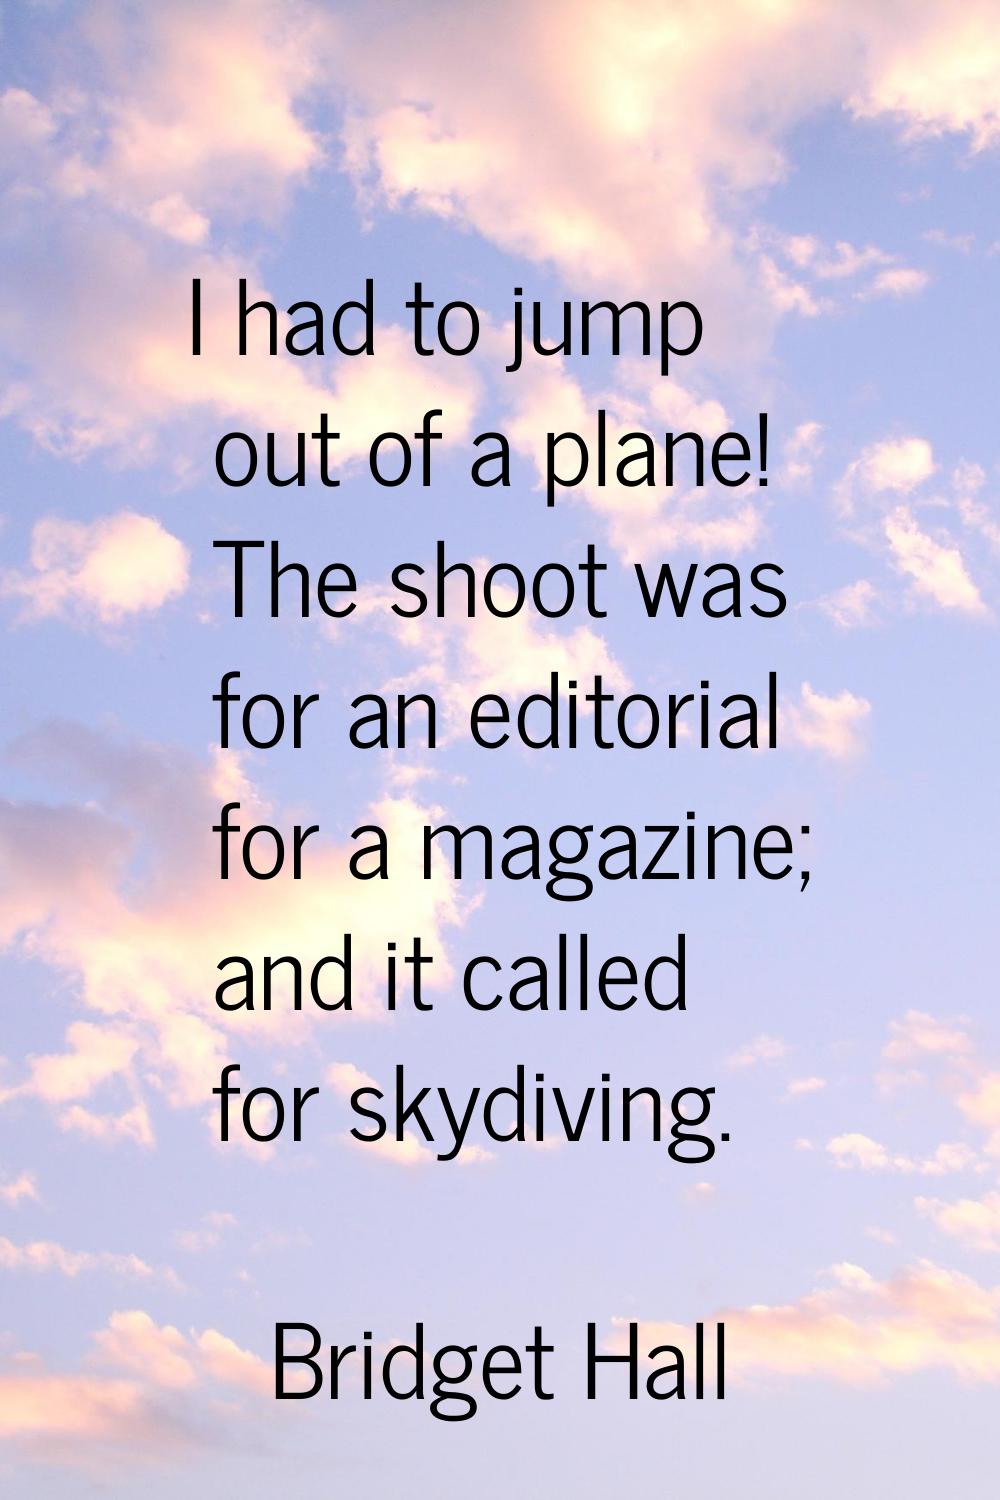 I had to jump out of a plane! The shoot was for an editorial for a magazine; and it called for skyd